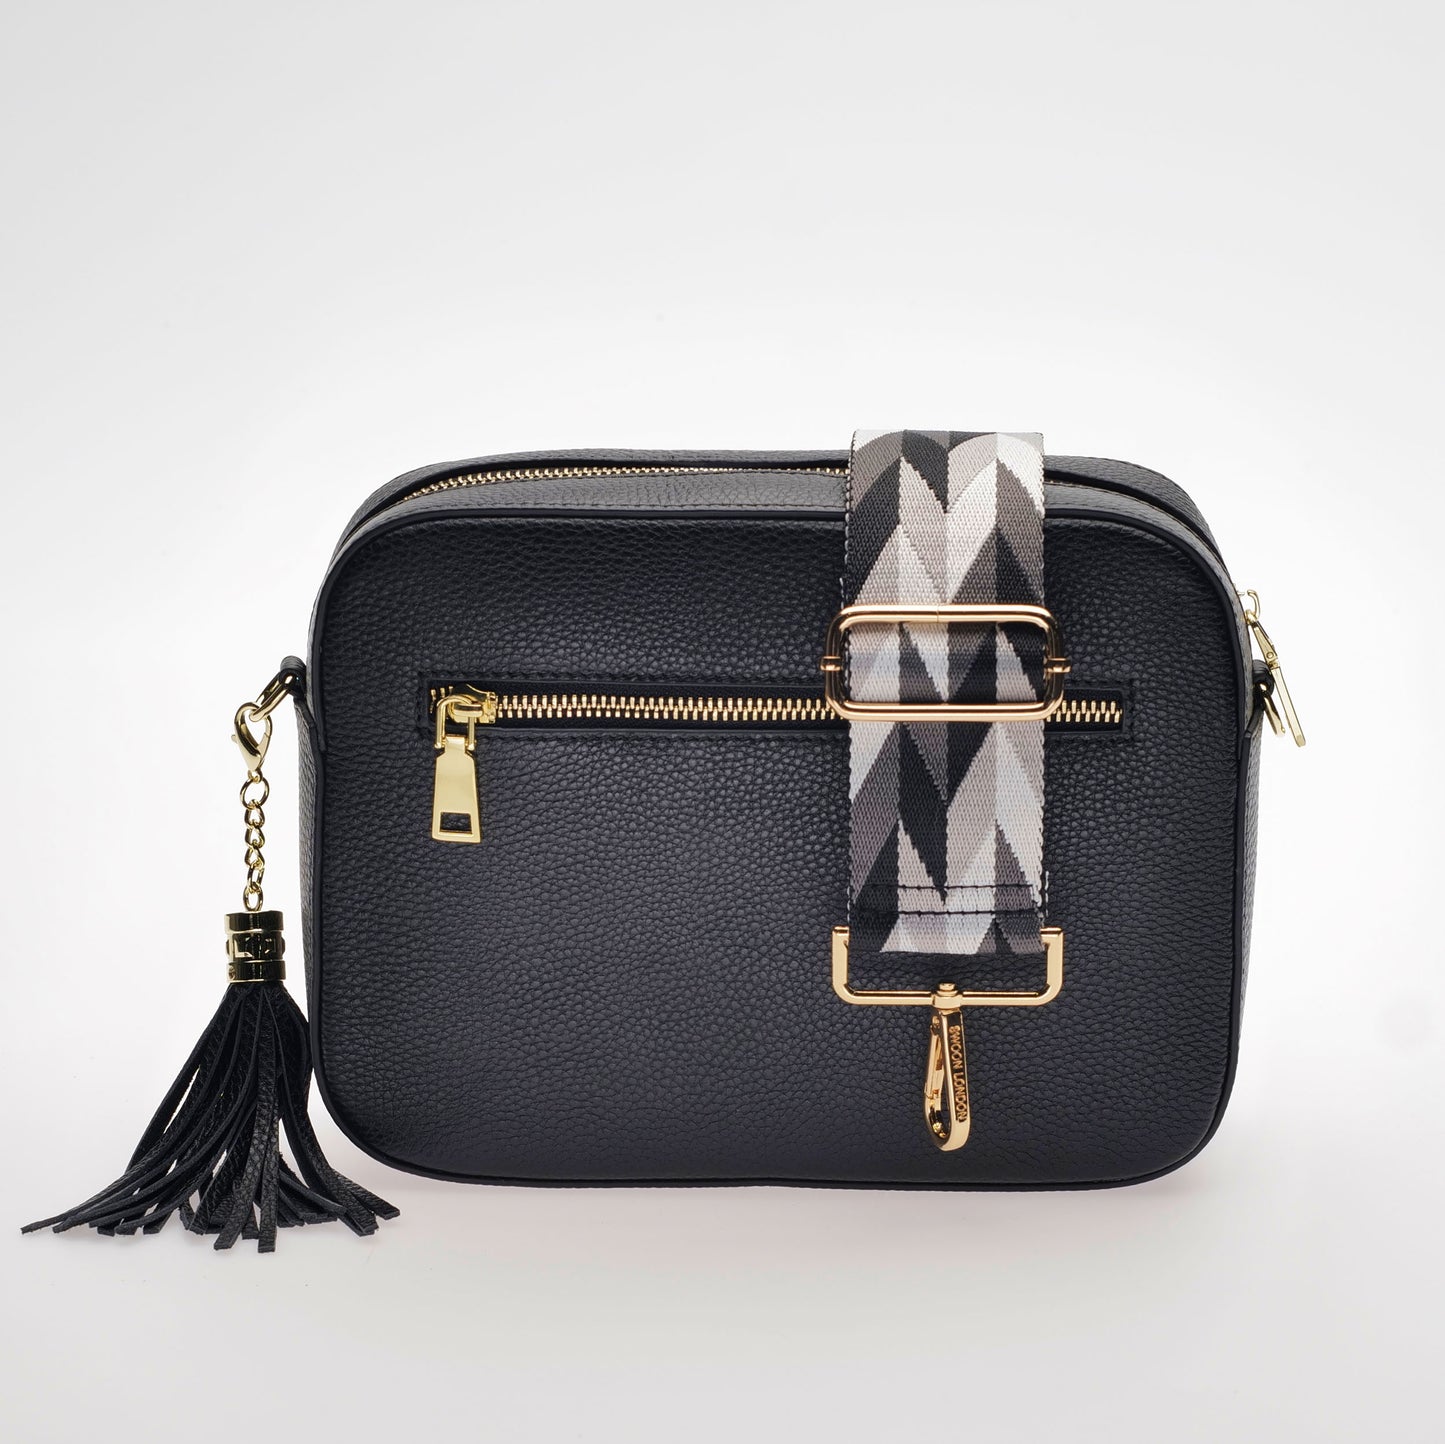 Grey Abstract Bag Strap by Swoon London